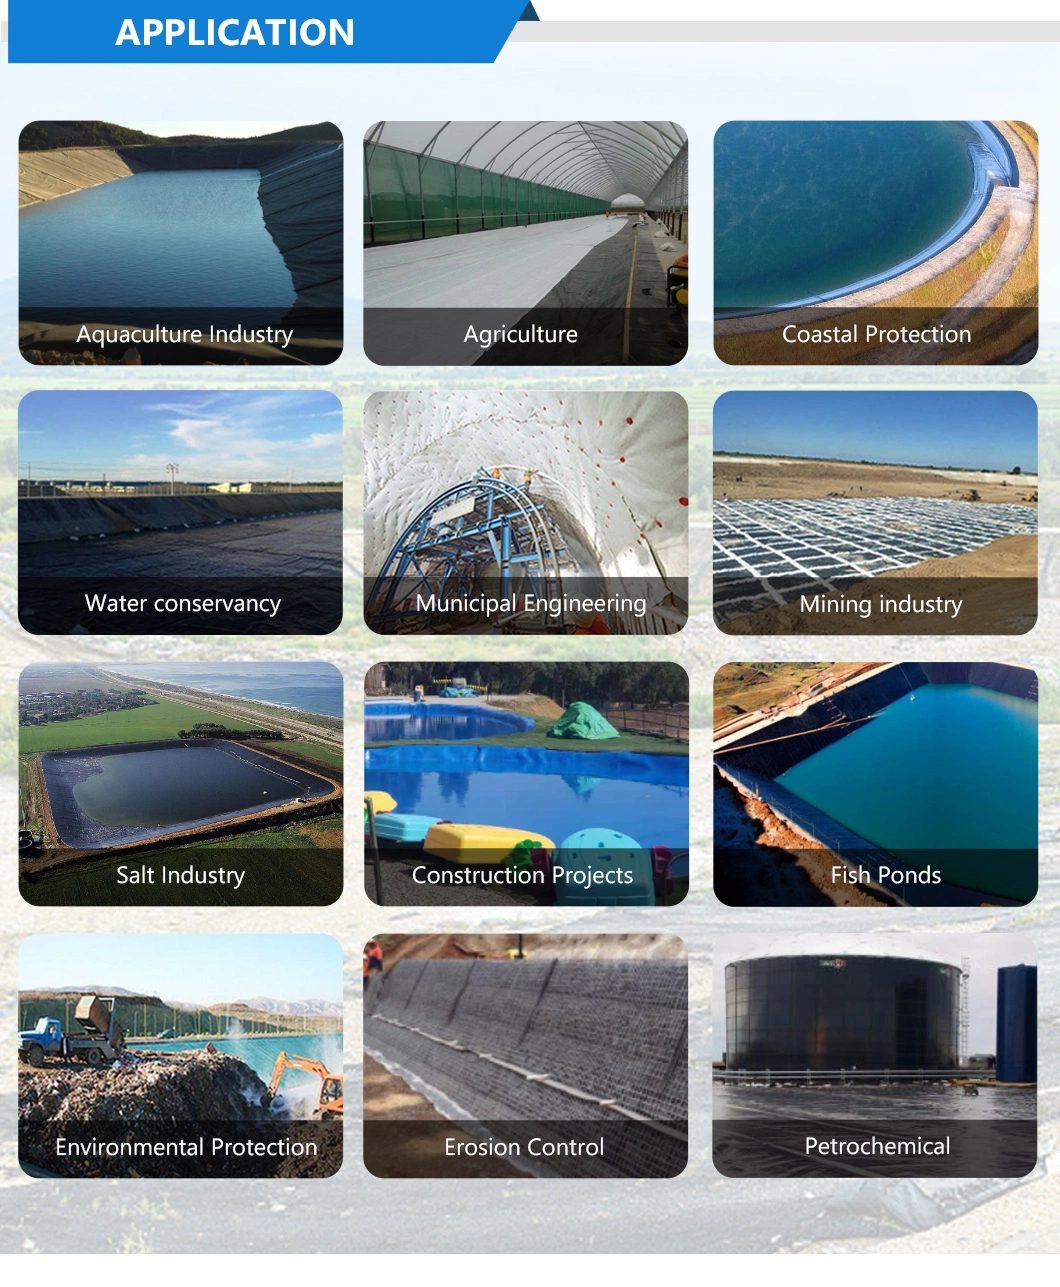 China Composite Geomembrane Manufacturer for Water Conservancy/Chemical Industry/Construction/Transportation/Subway/Tunnel/Garbage Disposal/Tunnel Railway